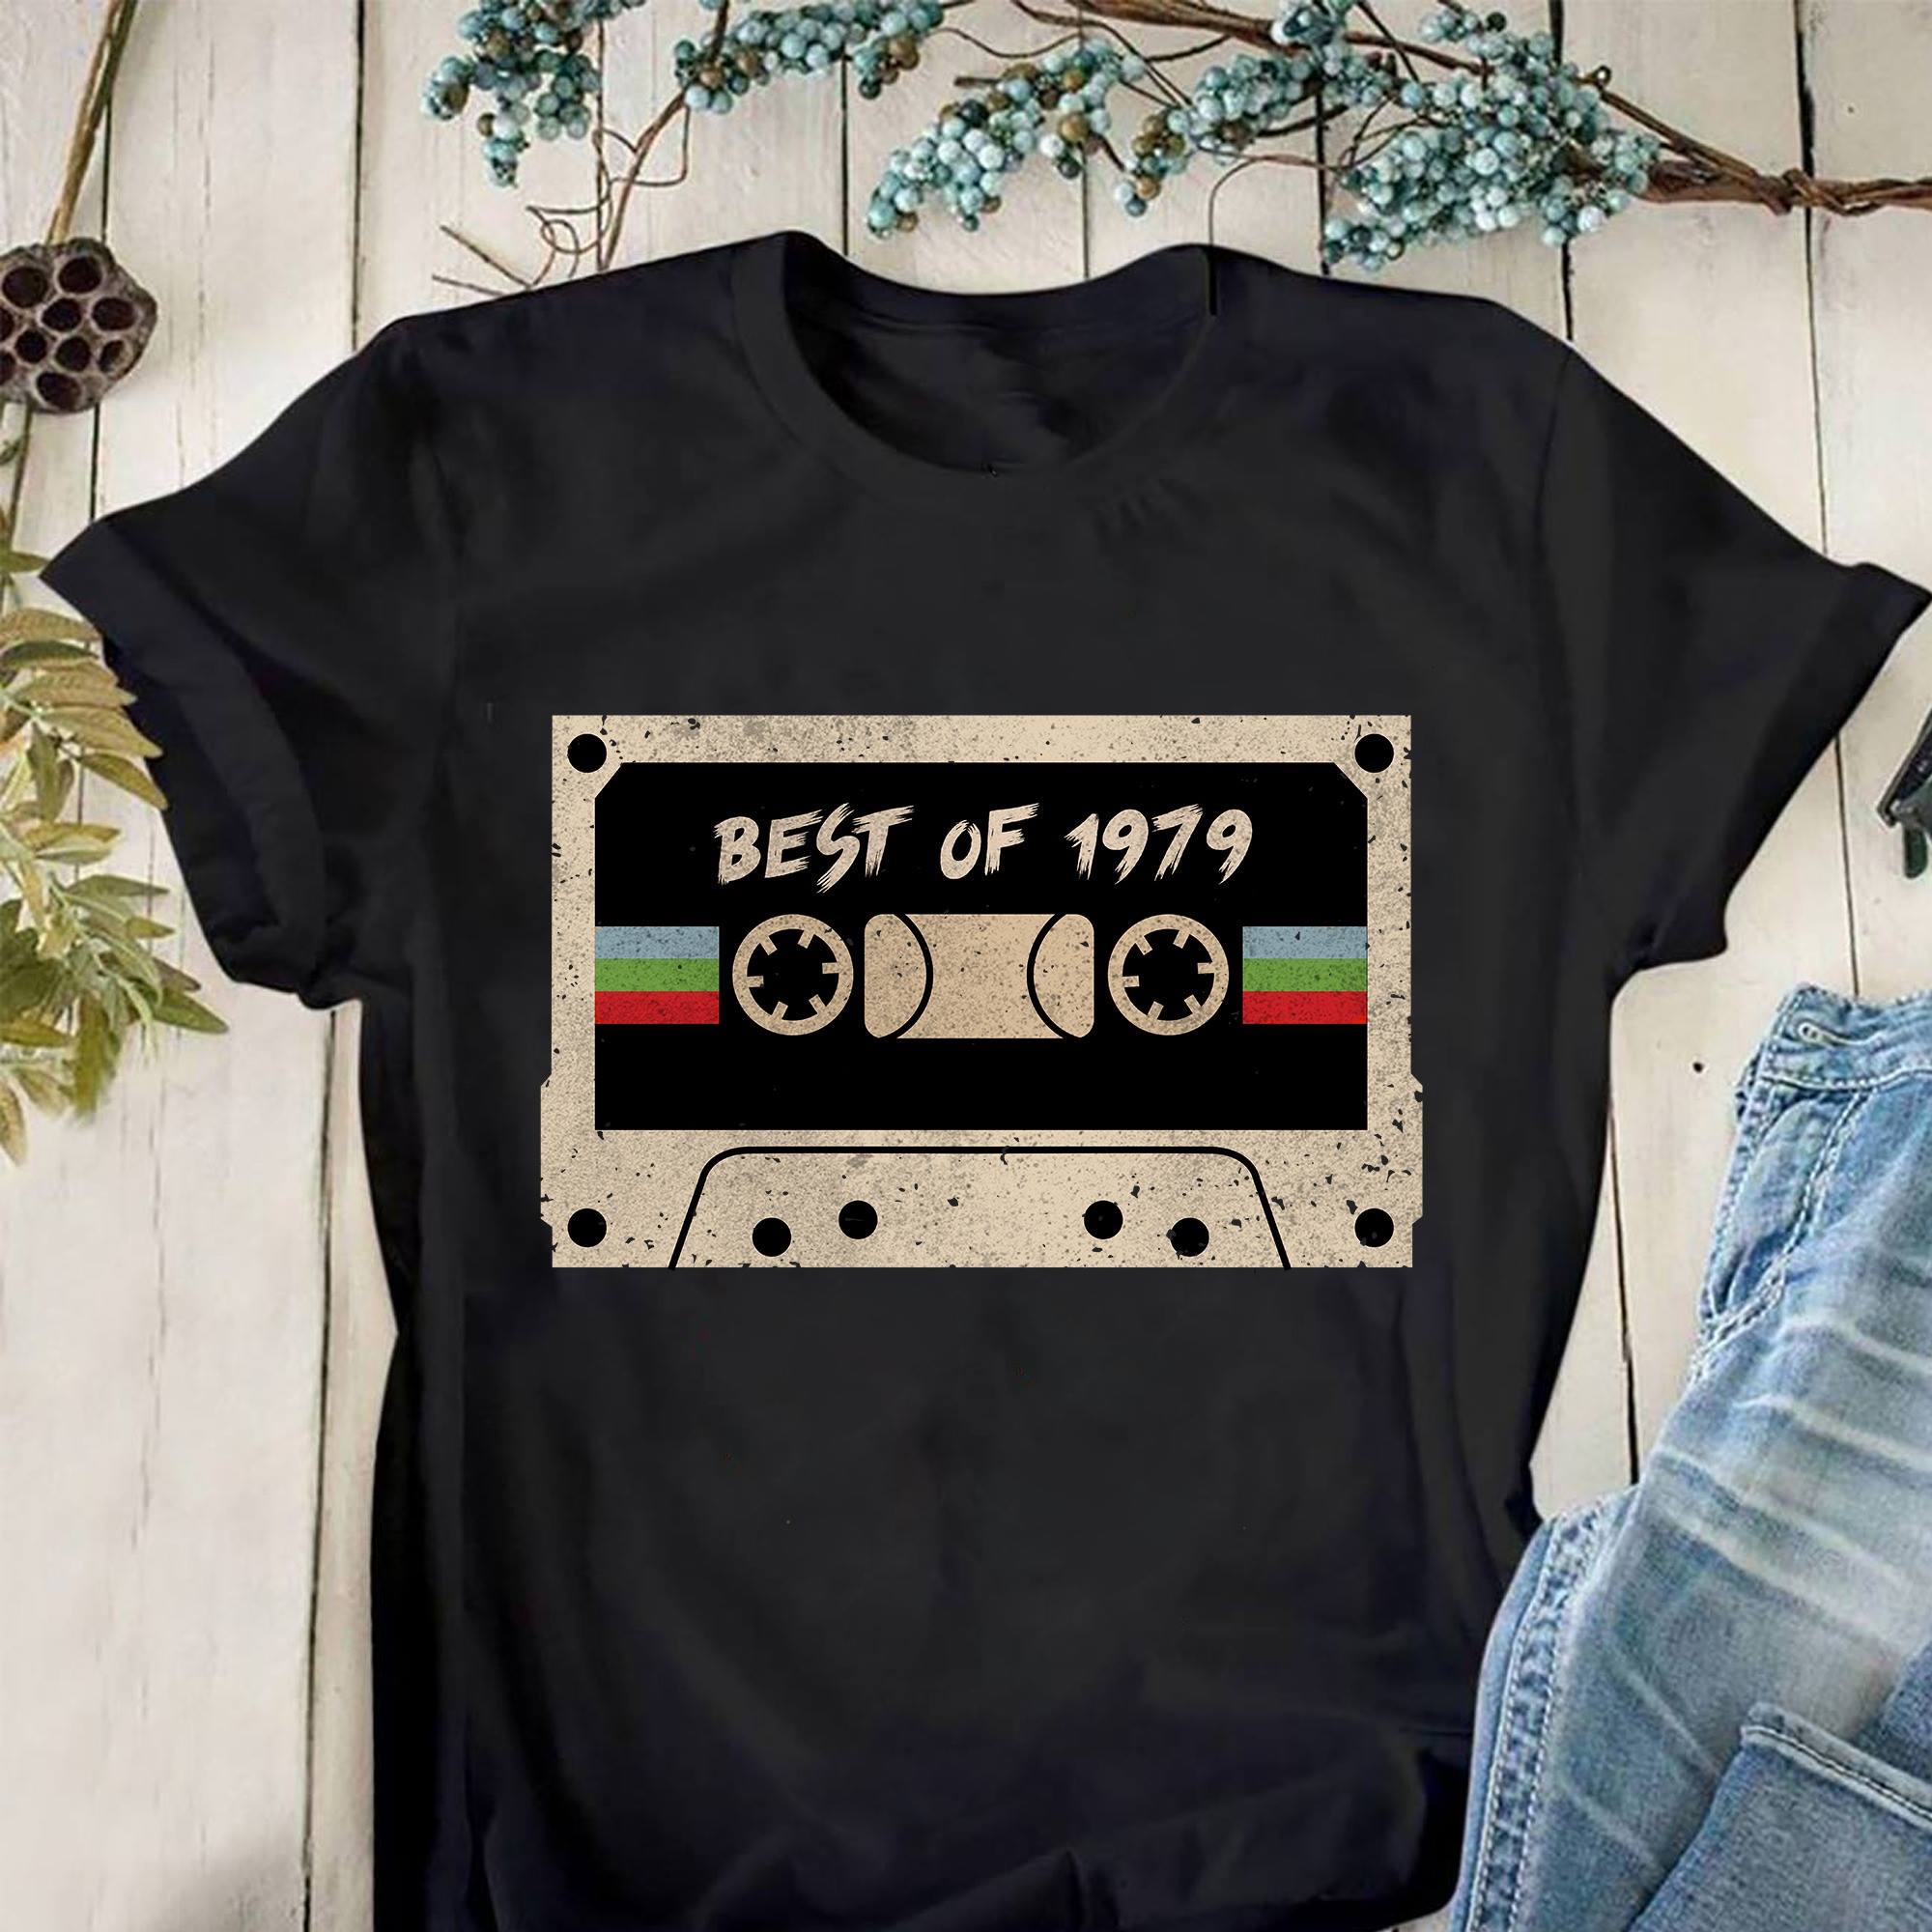 Best Of 1979, Birthday Gifts Idea, Gift For Her For Him Unisex T-Shirt KM0704